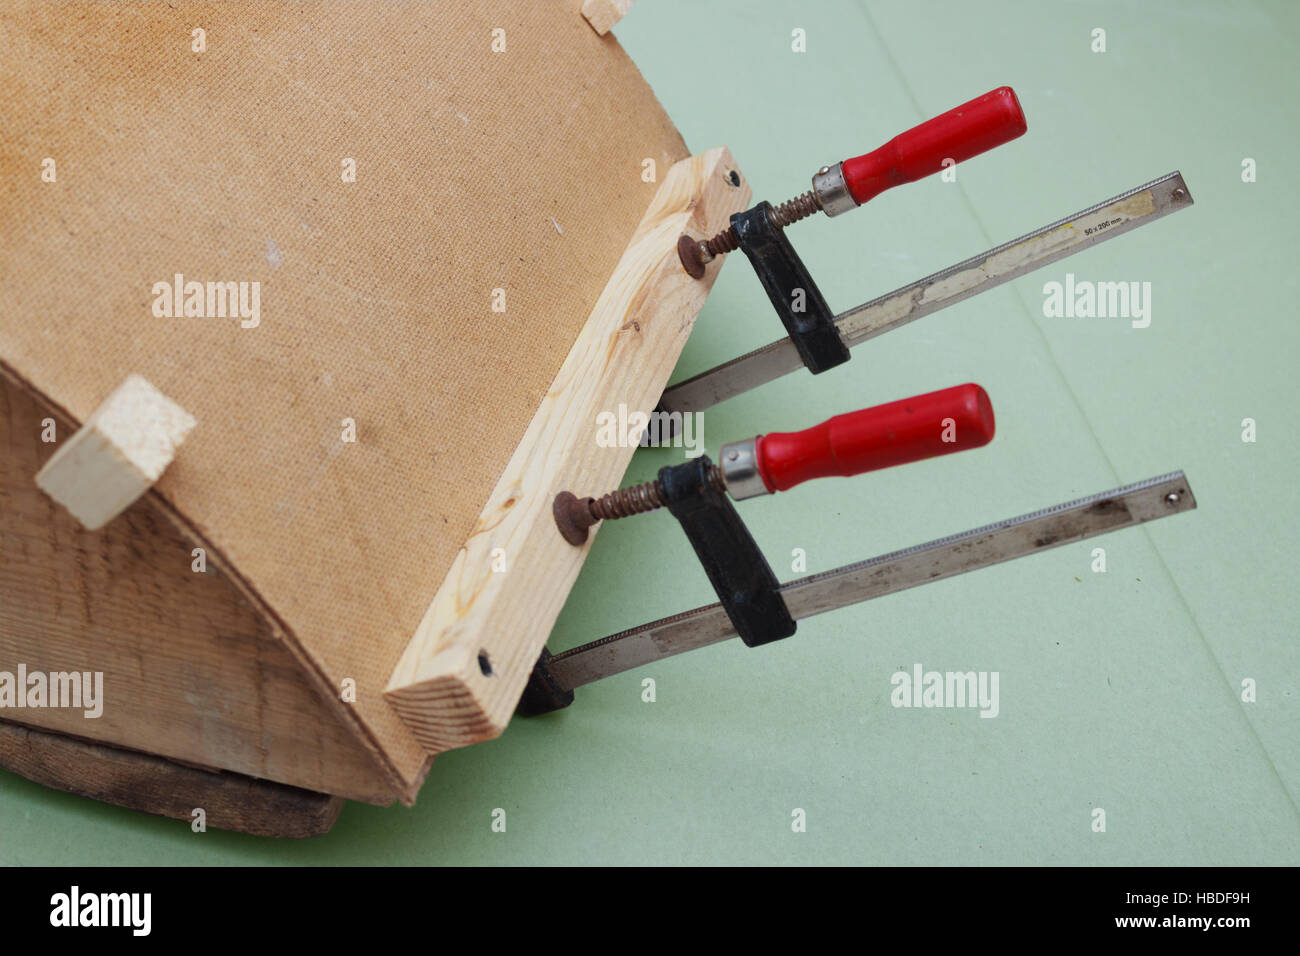 Clamps are used for gluing  workpiece Stock Photo